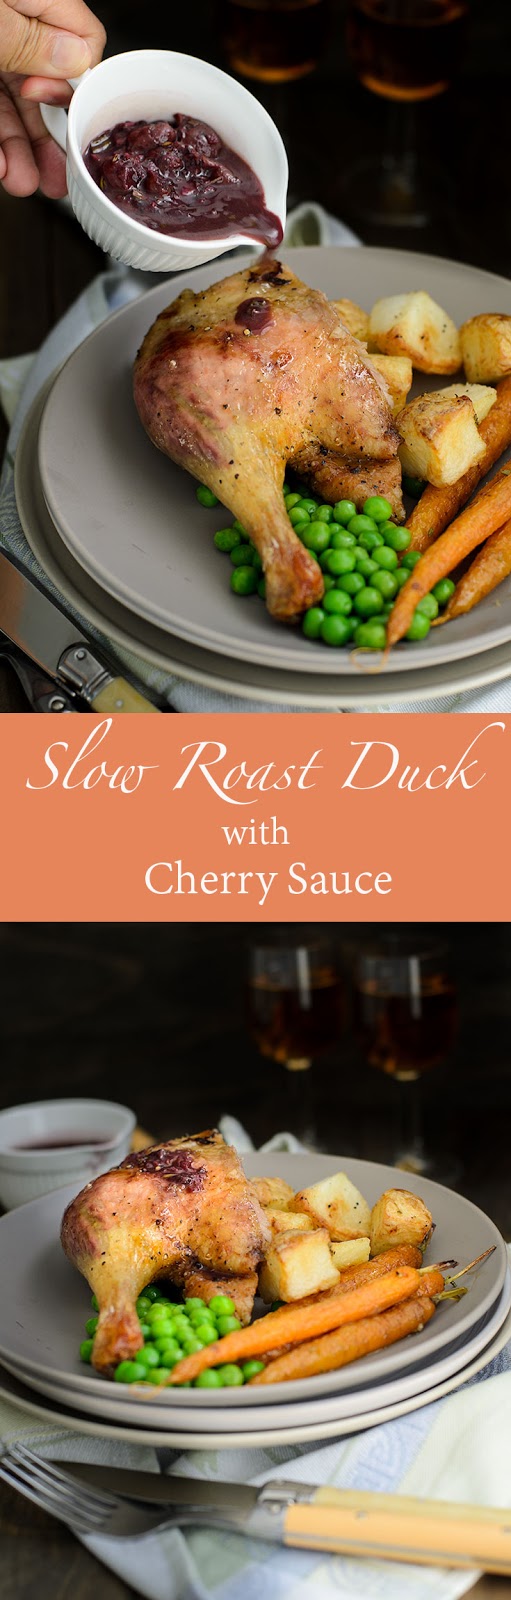 Slow Roast Duck with Cherry Sauce recipe. Simple and easy to cook. The duck is seasoned with salt and pepper. Ted Allen's 4 hours slow roast duck yields a crispy skin duck, meat that is tender and juicy.